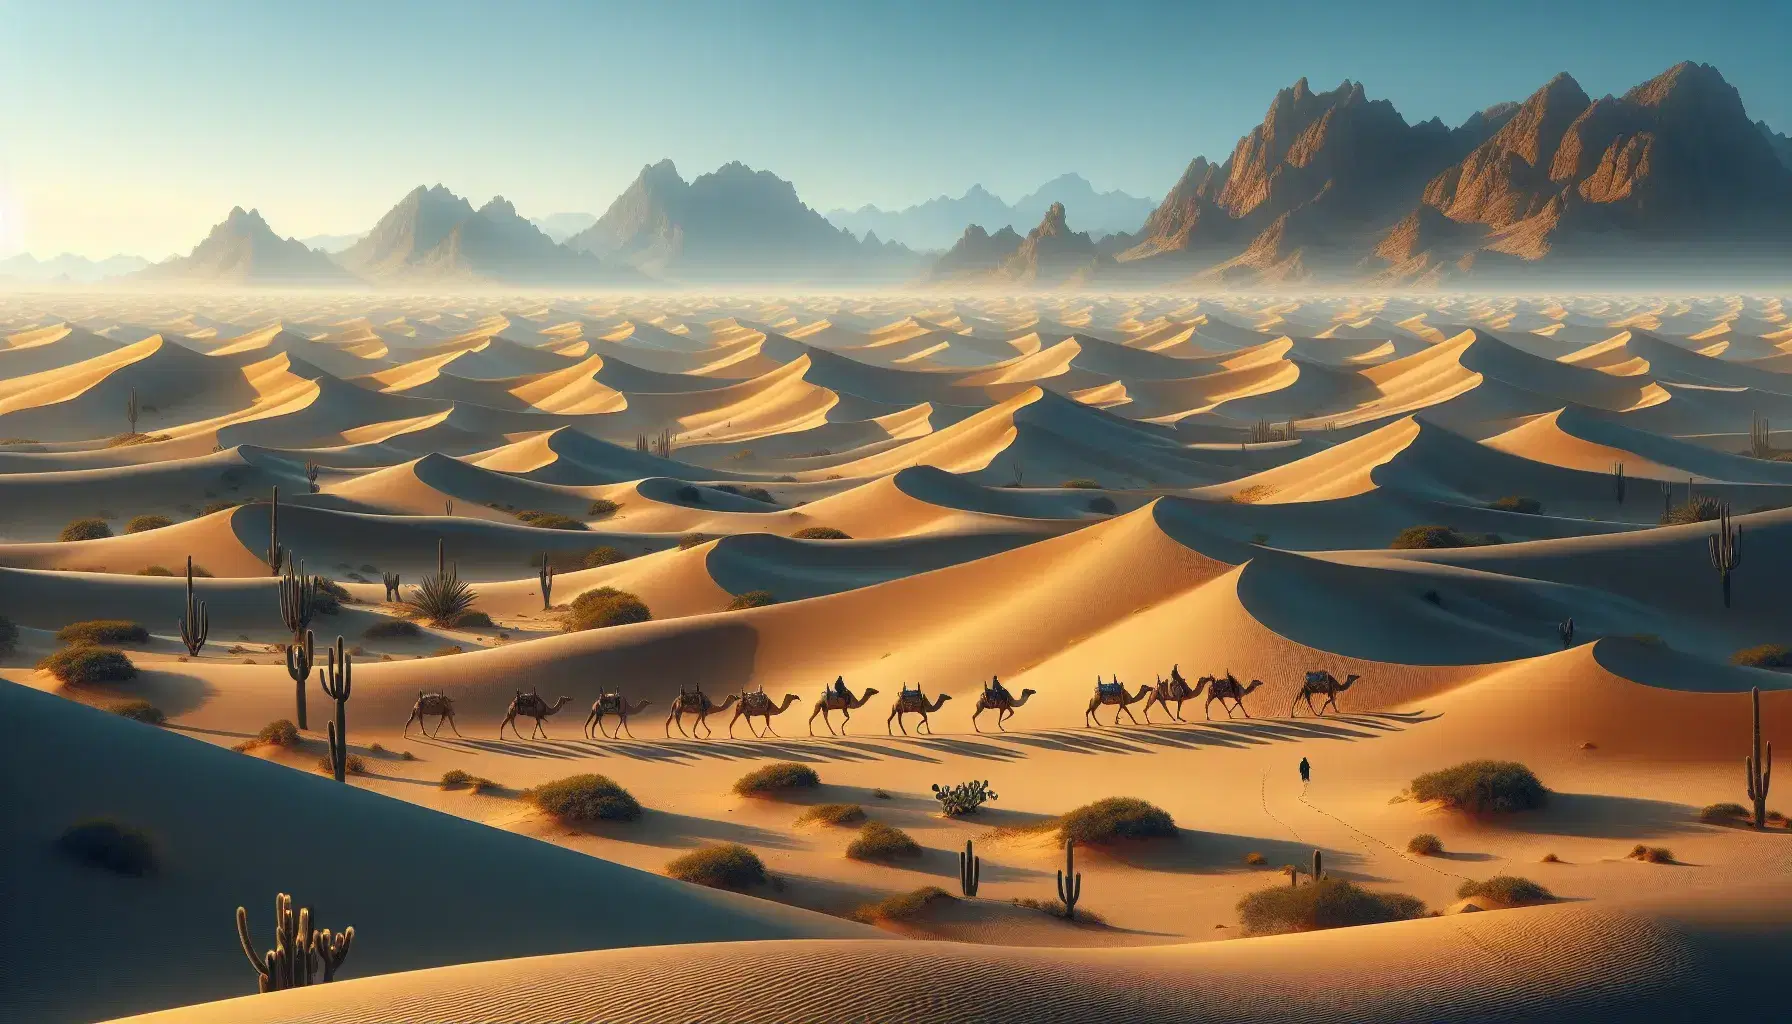 Desert landscape with sand dunes, hardy plants, camels with saddles and rocky mountains under a clear blue sky.